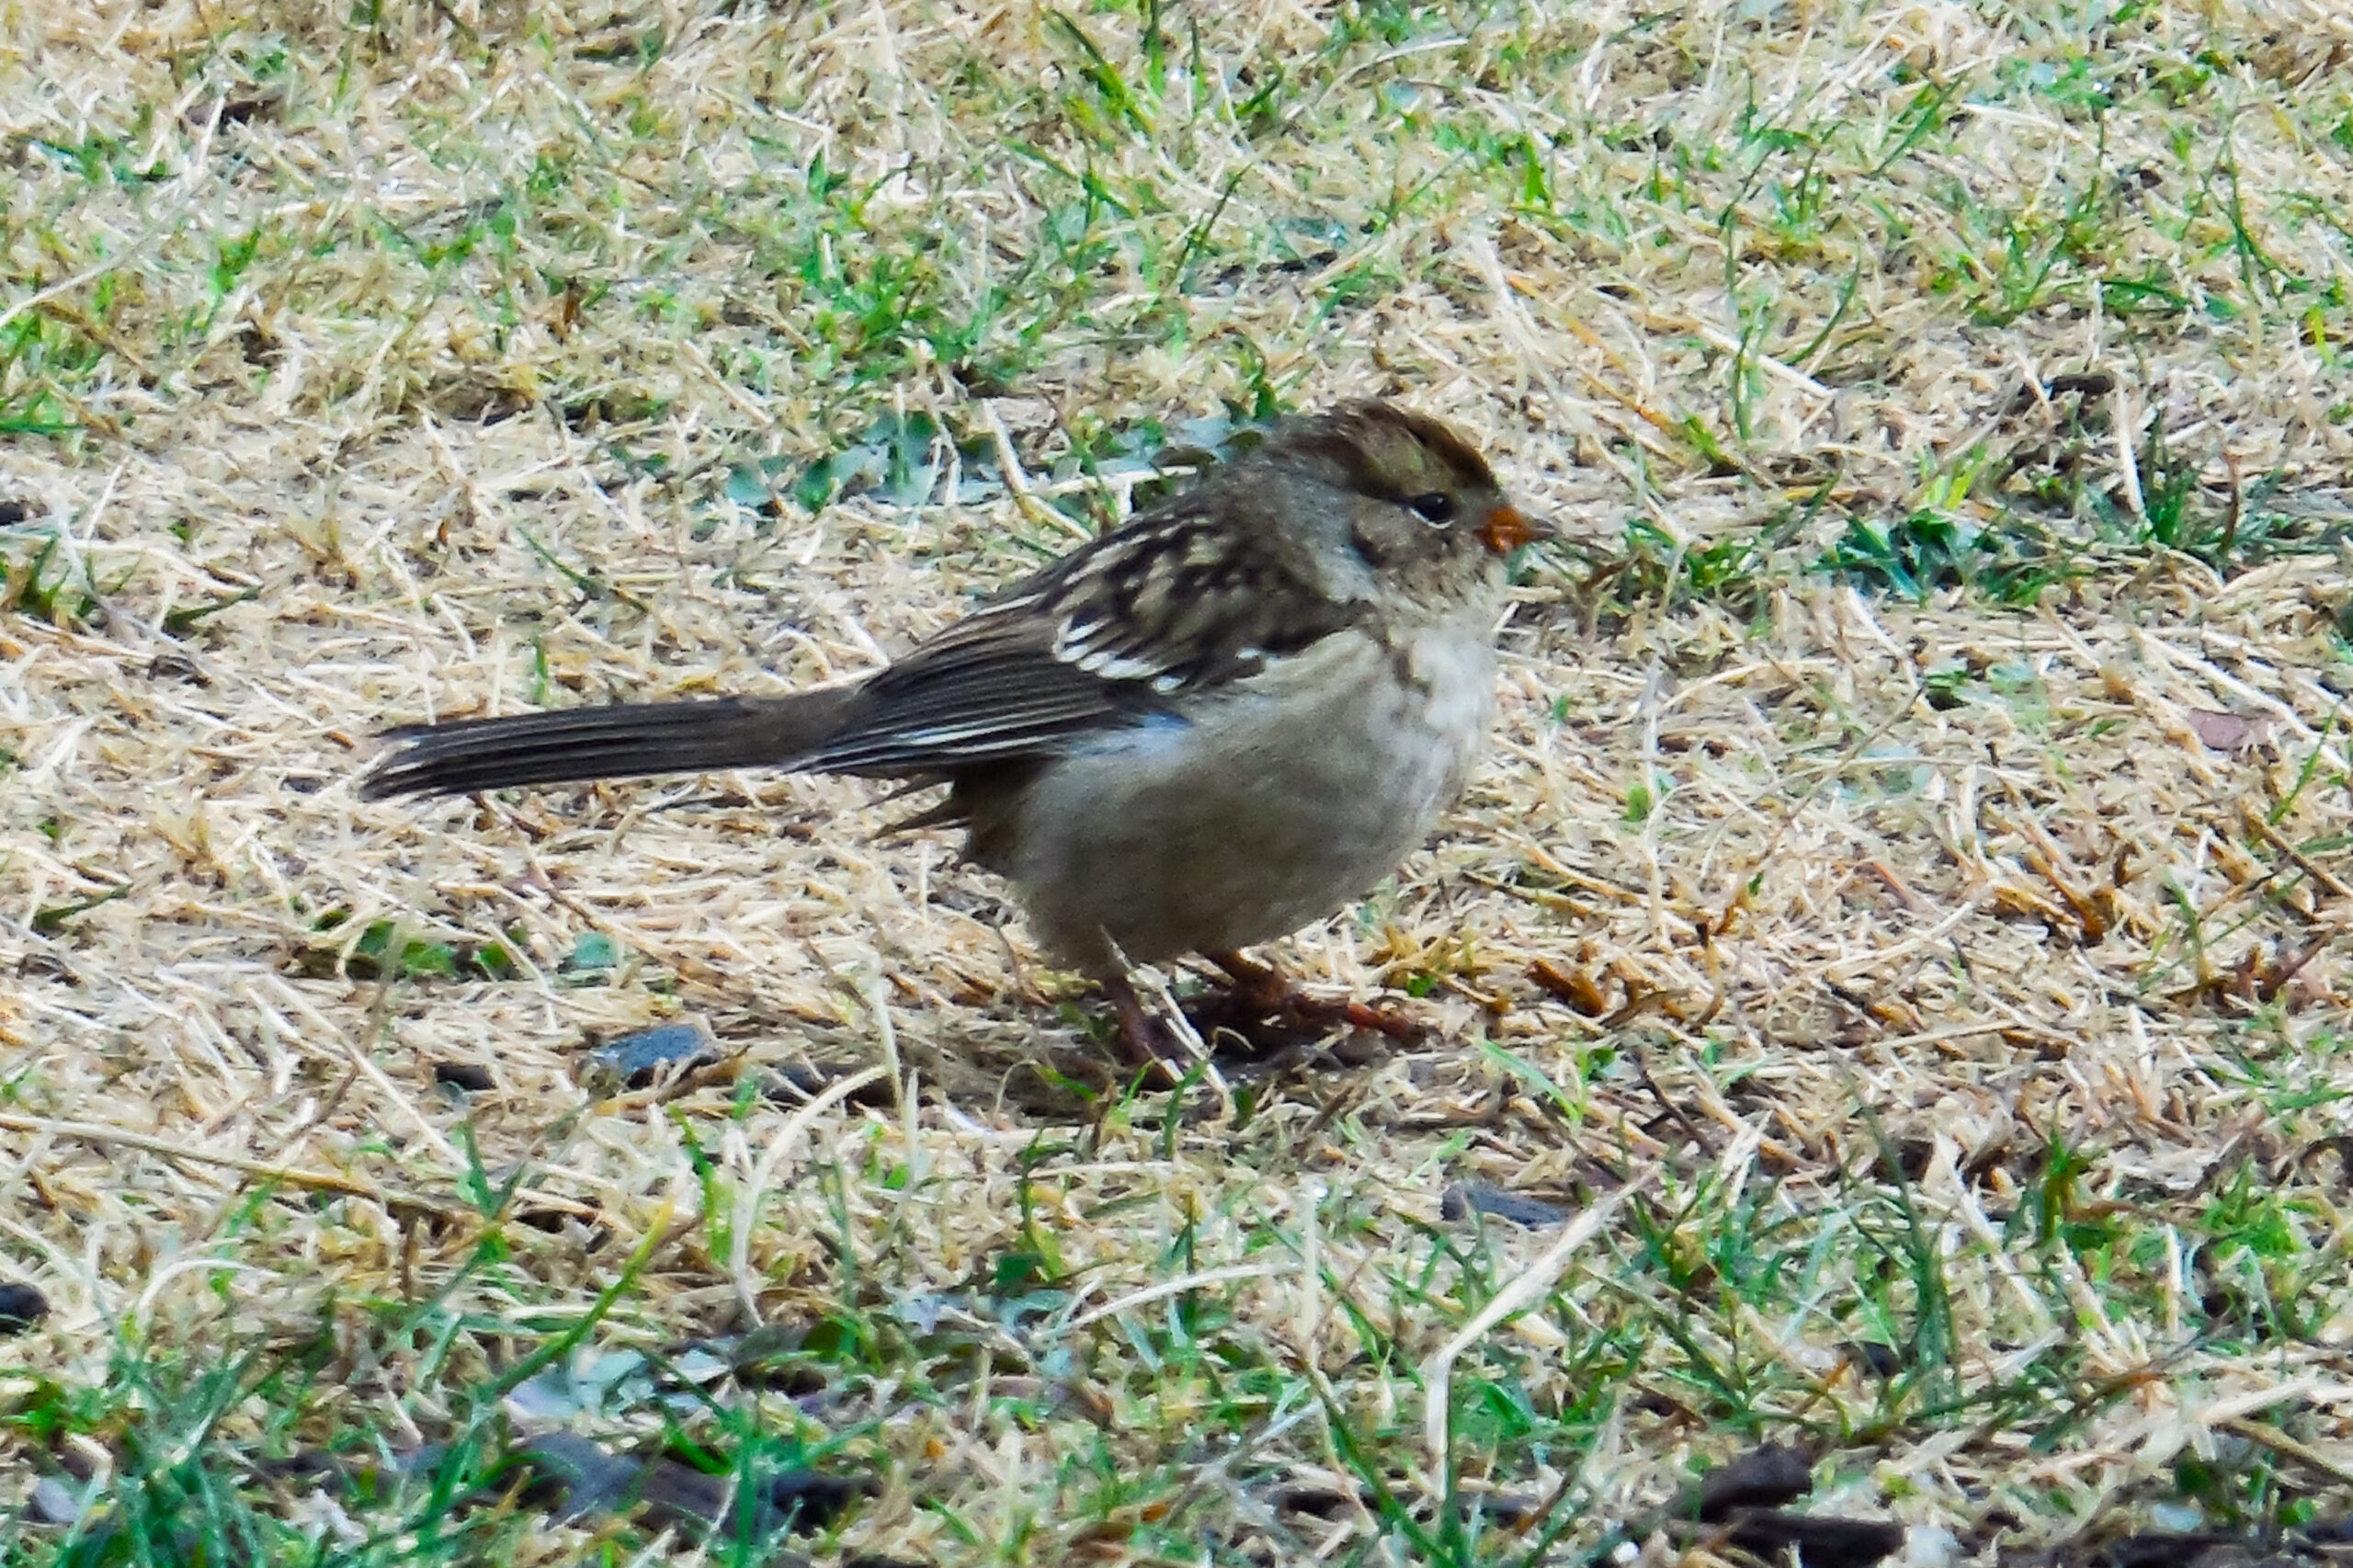 This is a photo of a small bird sitting on some grass.